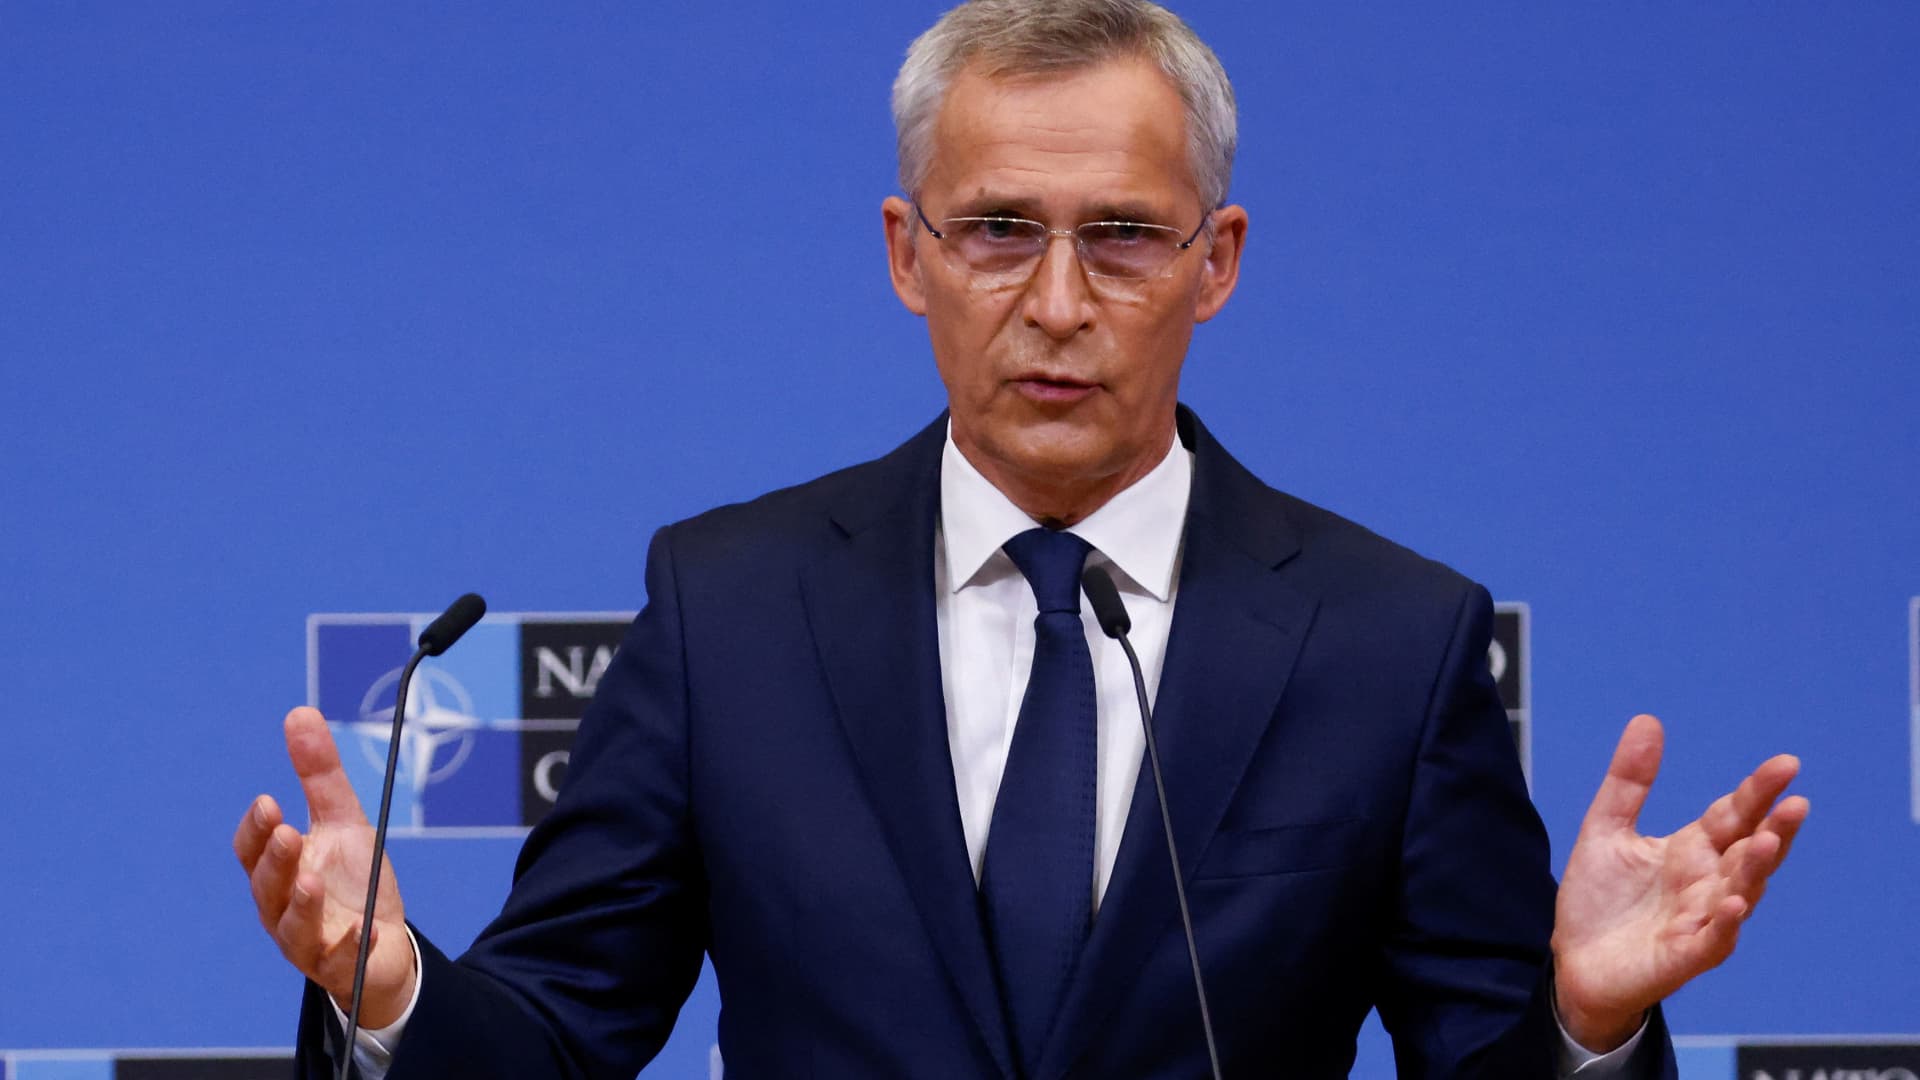 NATO Secretary General Jens Stoltenberg speaks during a news conference following a NATO defence ministers meeting at the Alliance's headquarters in Brussels, Belgium June 16, 2022. 